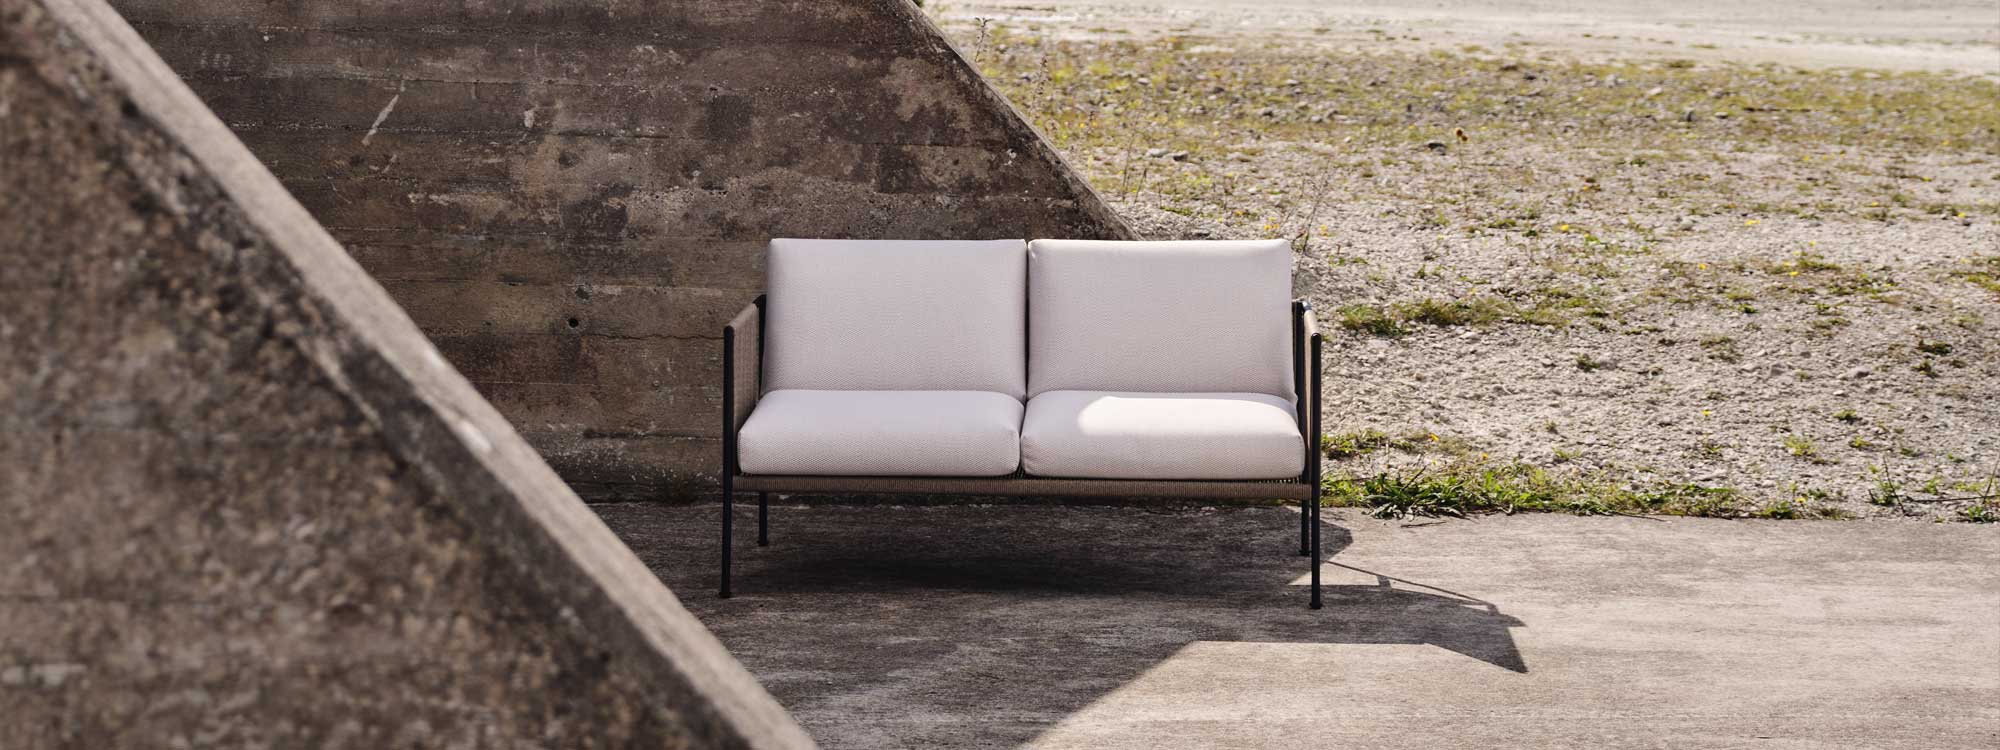 Antibes outdoor lounge set includes a garden easy chair, a 2 seat garden sofa & low tables by Roshults modern garden furniture - Sweden.